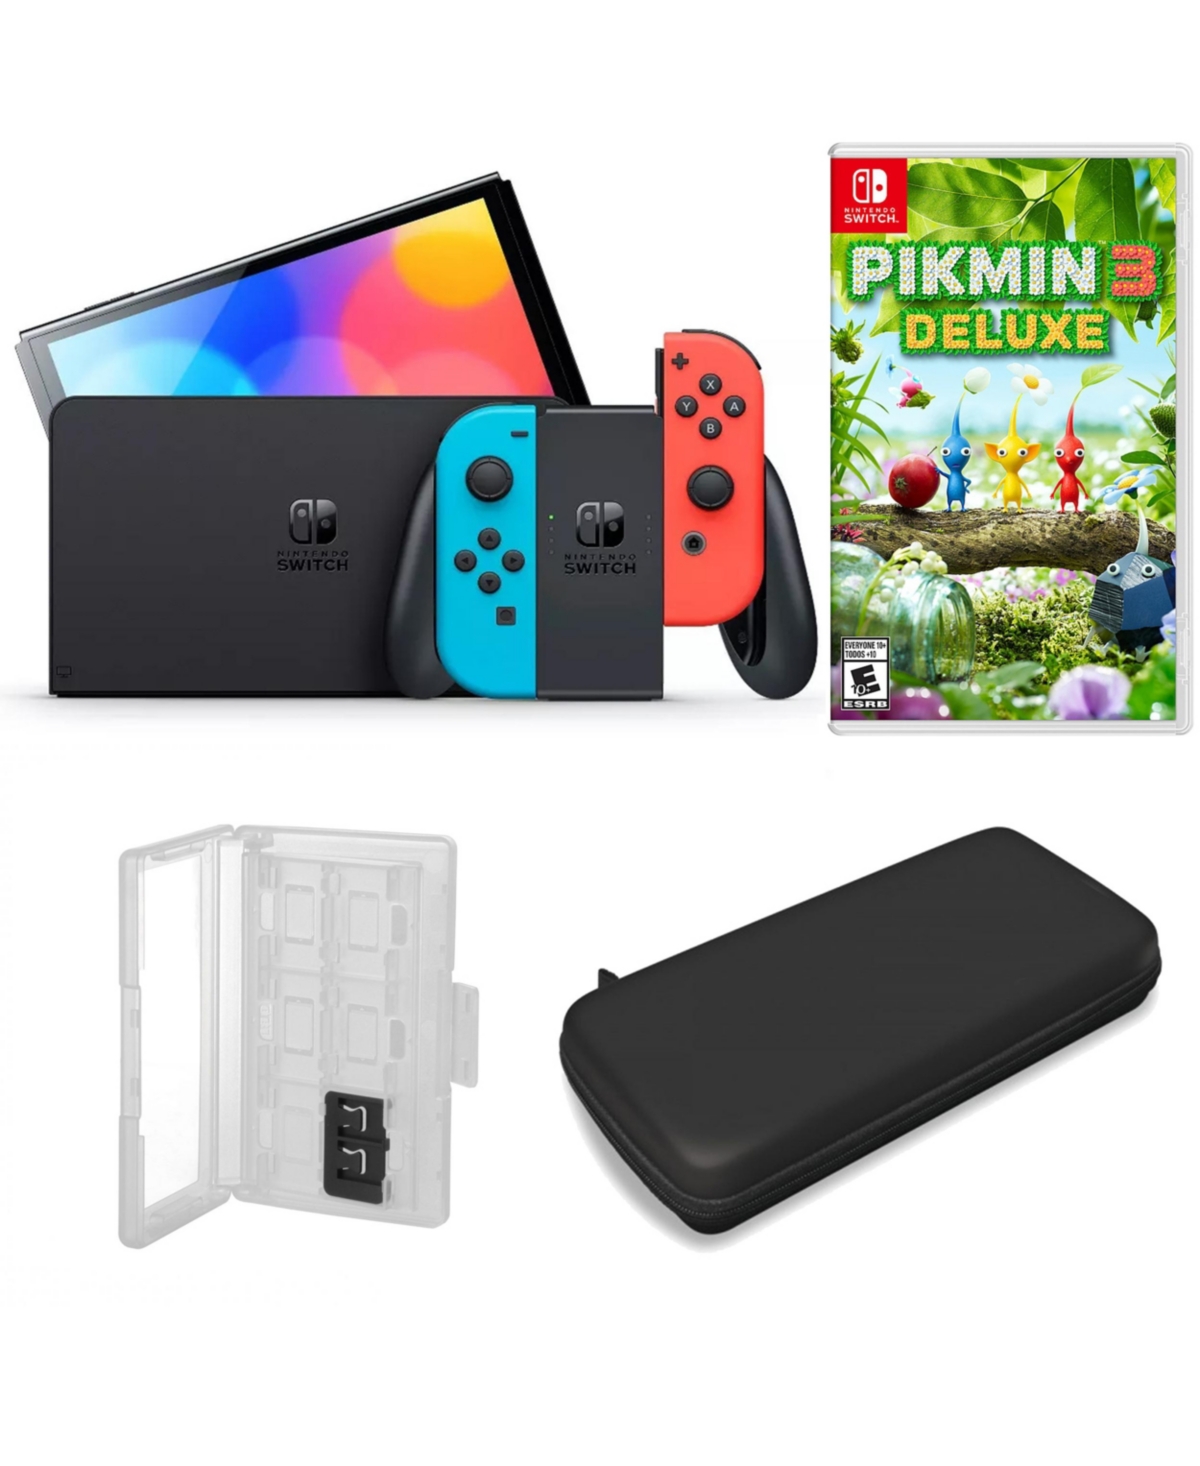 UPC 658580285920 product image for Nintendo Switch Oled in Neon with Pikmin 3 & Accessories | upcitemdb.com